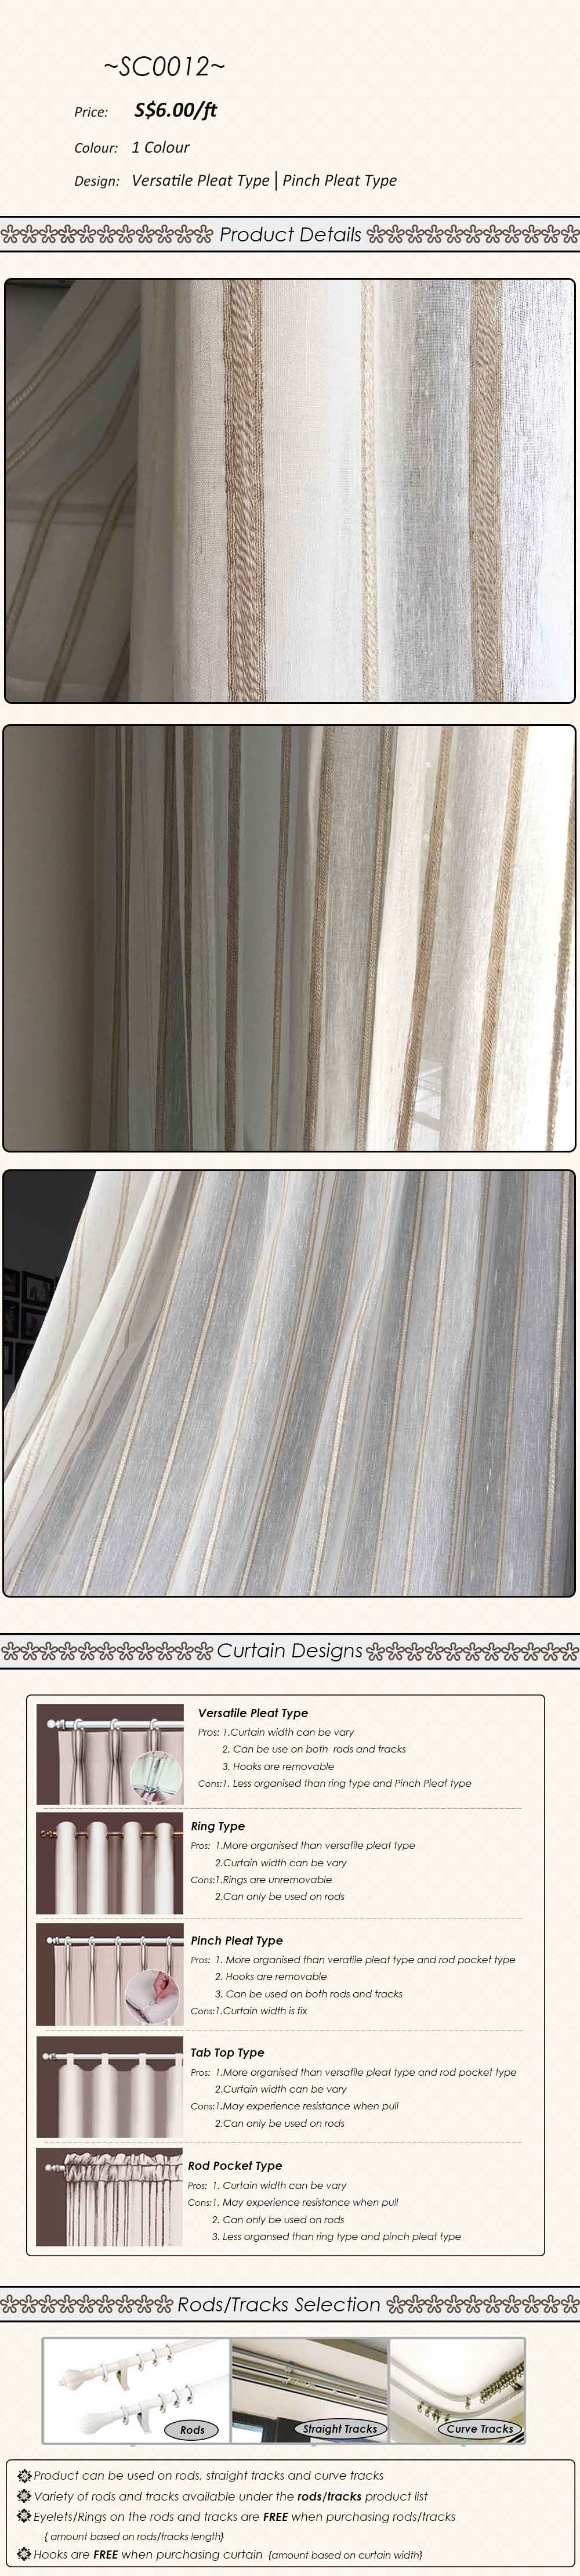 Curtain Singapore, Ming's Living, blackout curtain Singapore, budget curtain Singapore, curtain supplier, roller blinds, sheer curtain